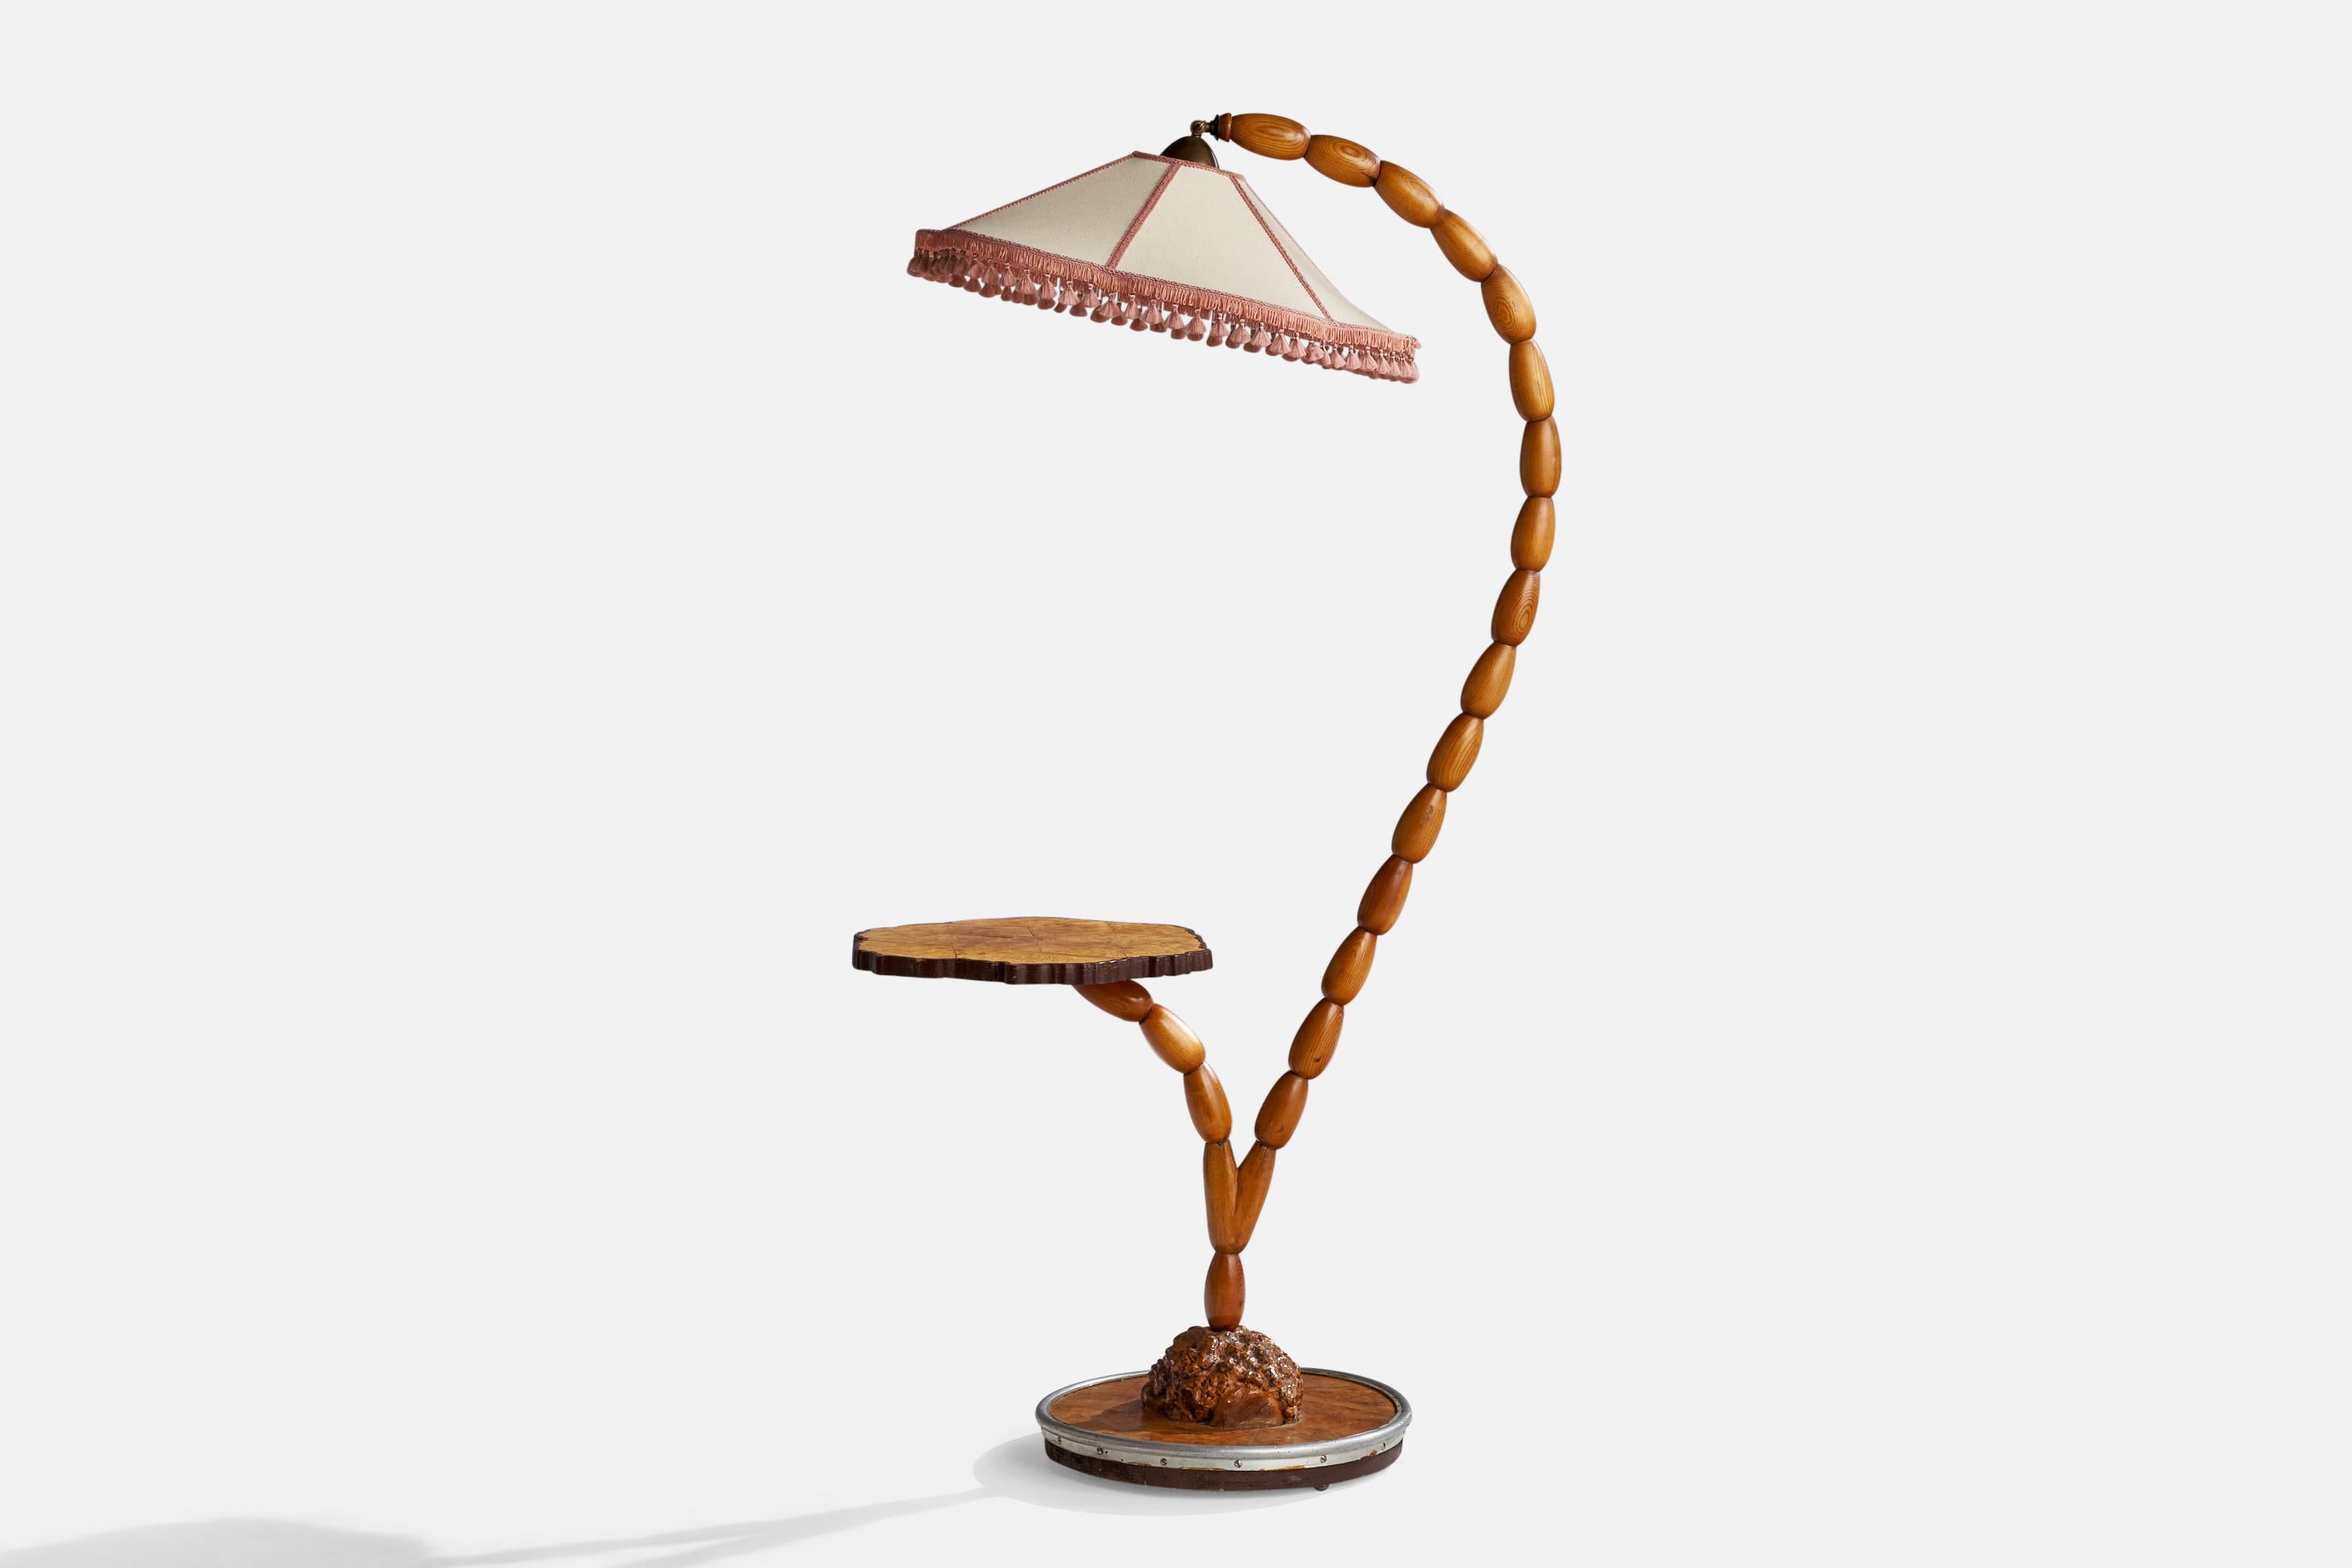 A pine, brass, metal, birch and fabric floor lamp with table designed and produced in Sweden, c. 1960s.

Overall Dimensions (inches): 63” H x 22.5”  W x 32.5”  D
Stated dimensions include shade.
Bulb Specifications: E-26 Bulb
Number of Sockets: